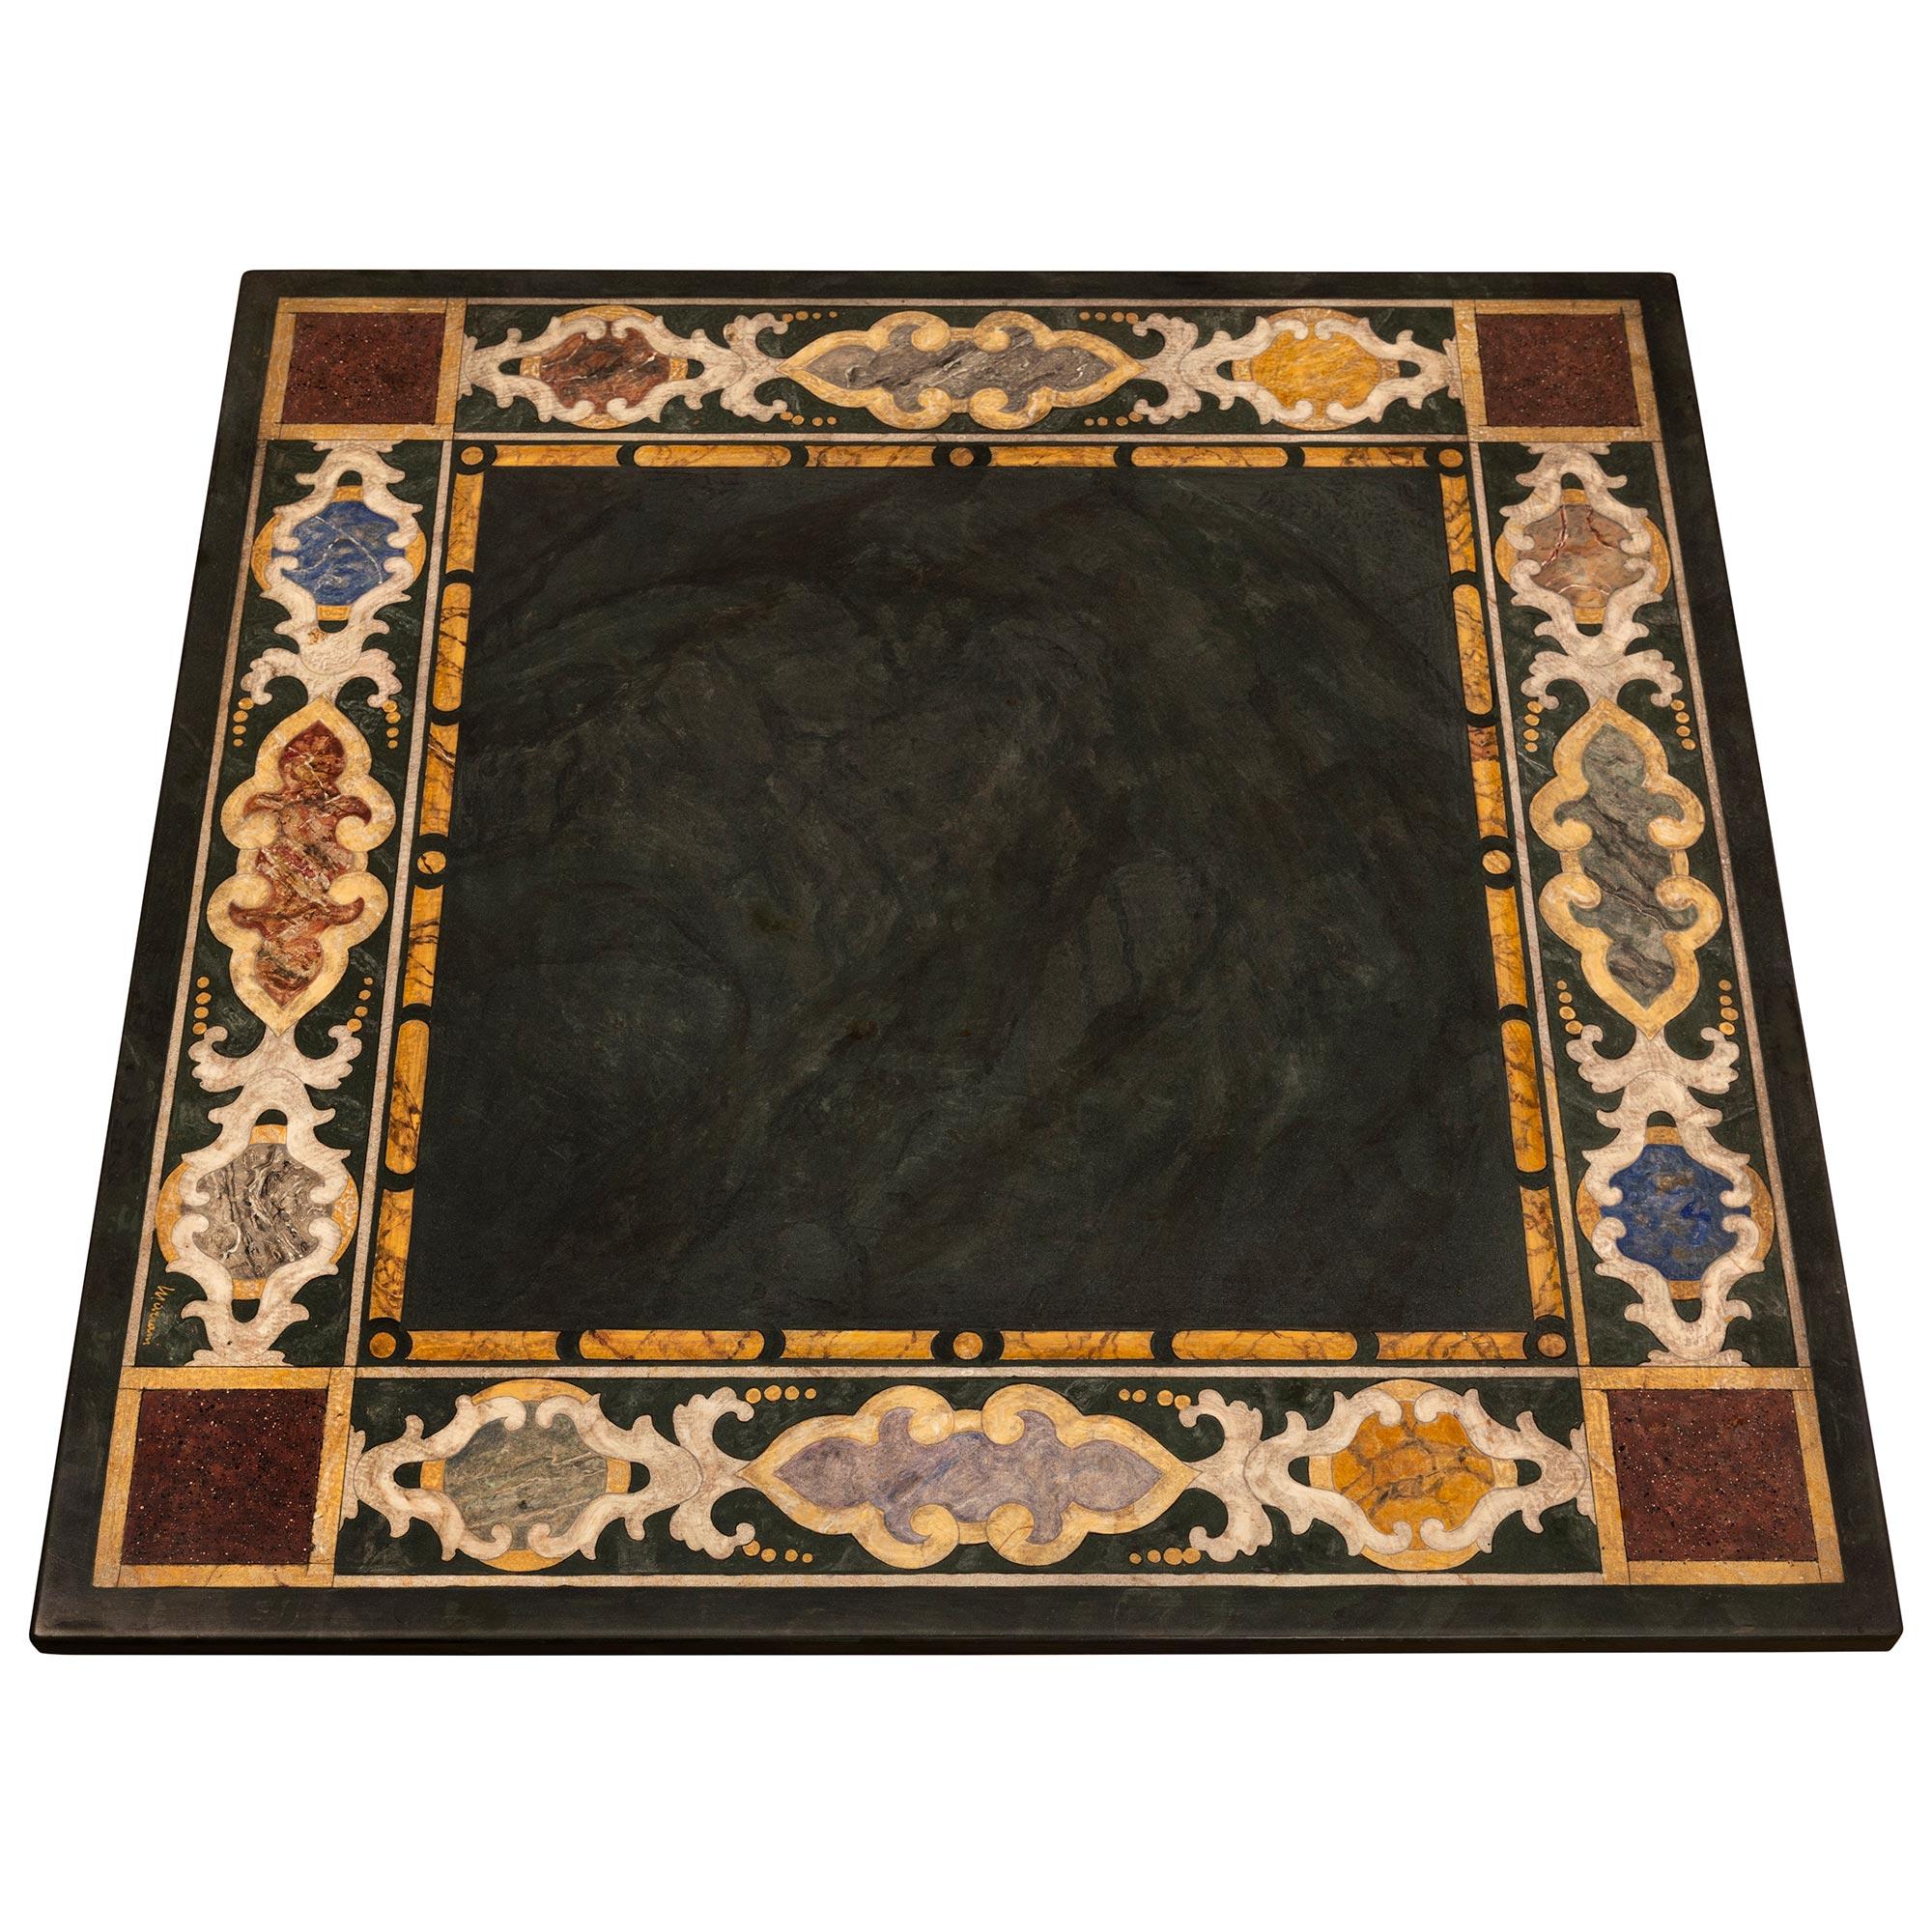 A striking and most decorative Italian 19th century Scagliola and Rosso de Verona marble coffee table. The square coffee table is raised by an impressive 18th century Rosso de Verona inverted Ionic capital with superb scrolled designs and lovely